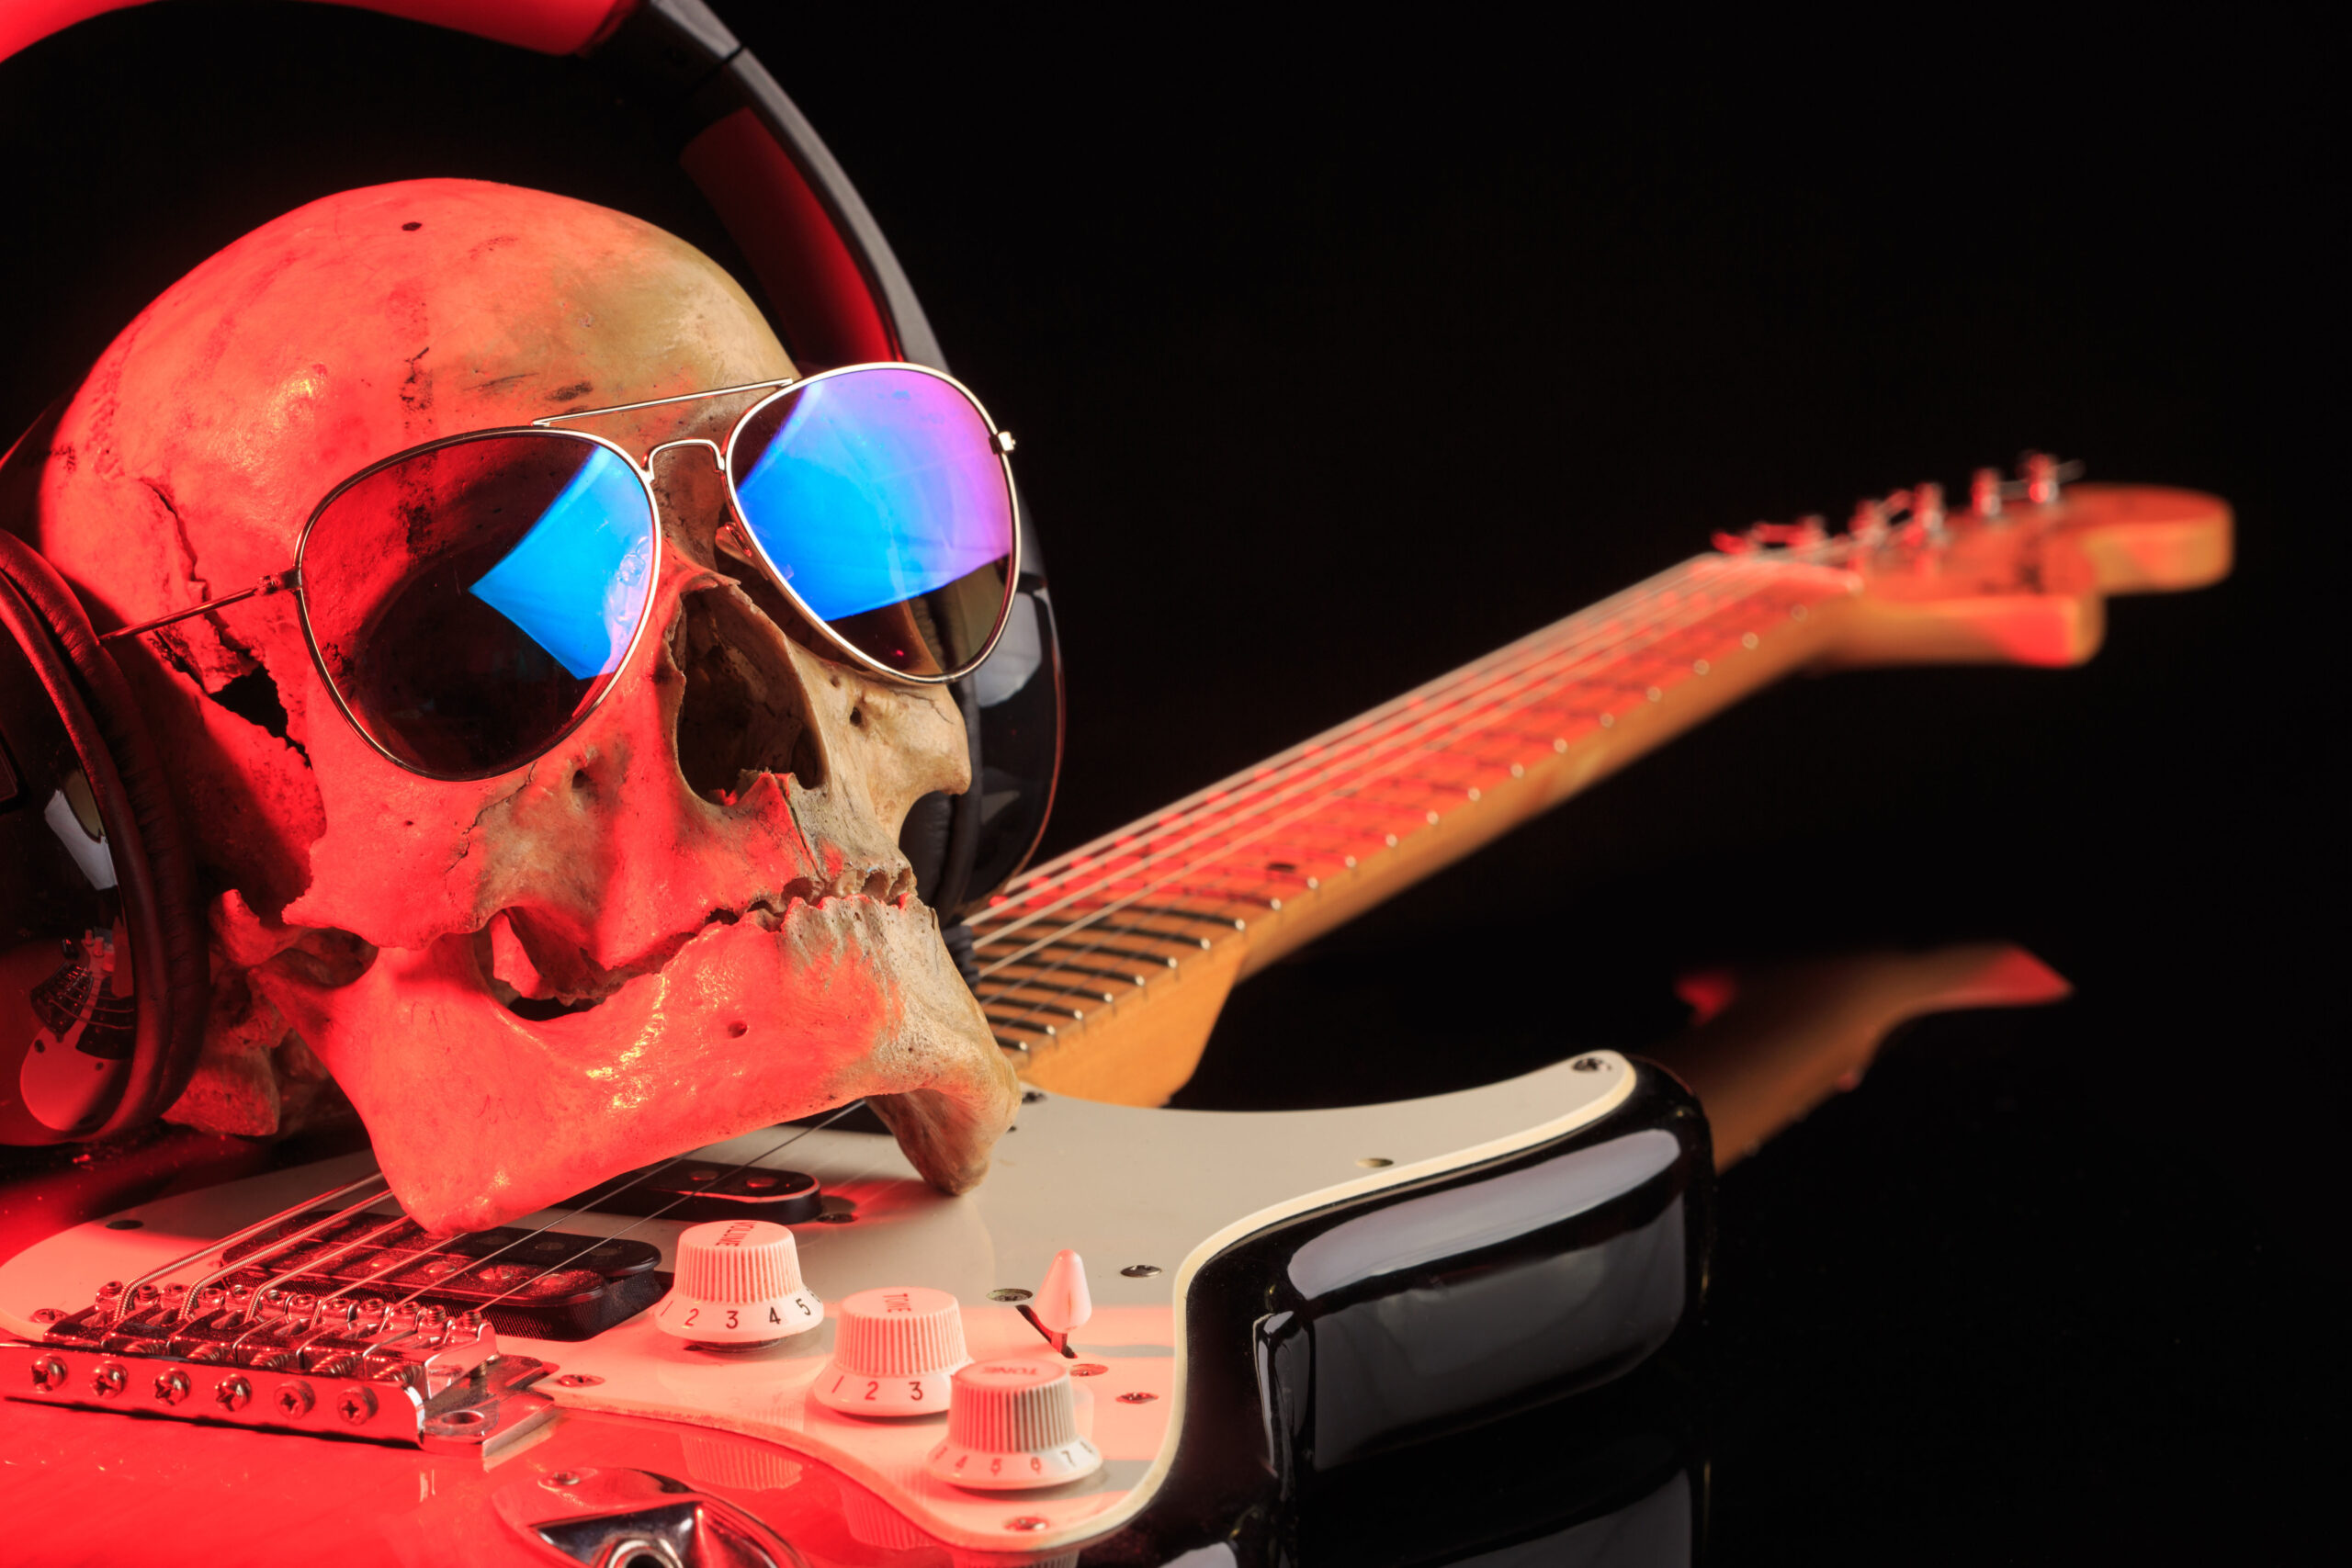 A skull wearing headphones and aviator sunglasses sits on a Telecaster style guitar.